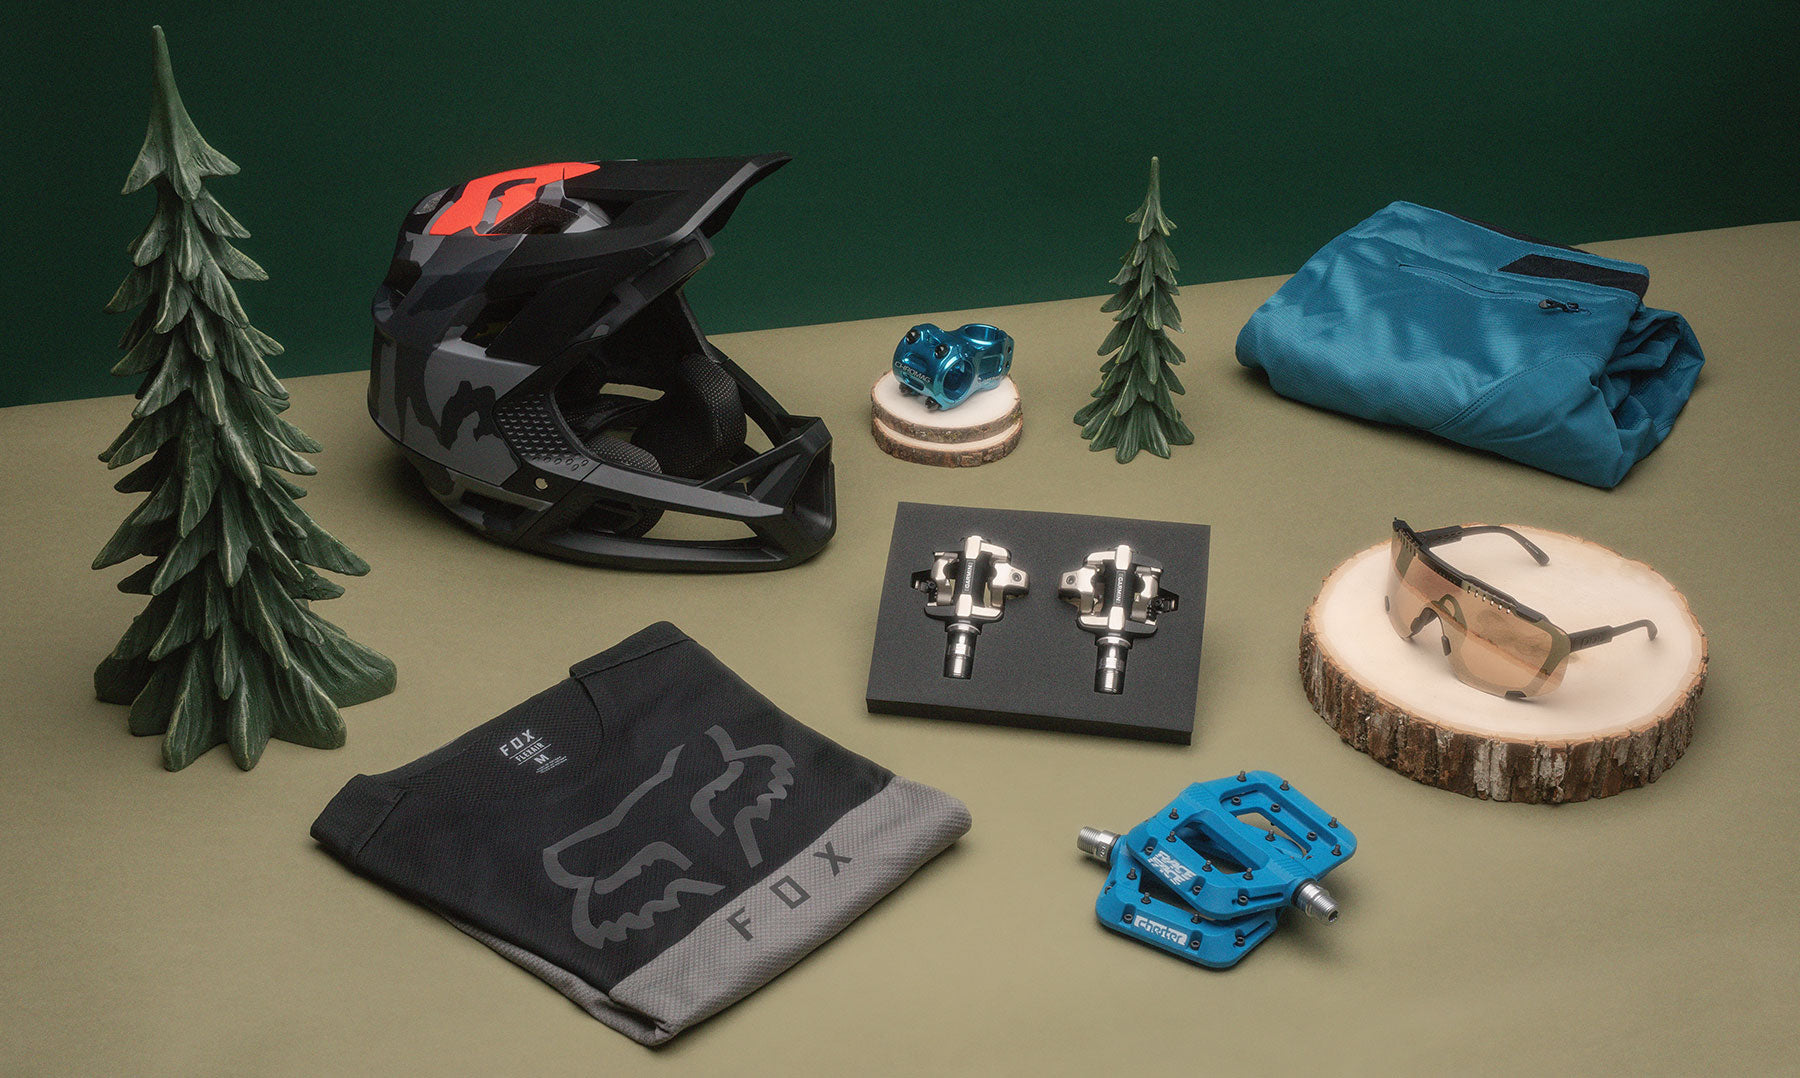 MTB holiday gift guide